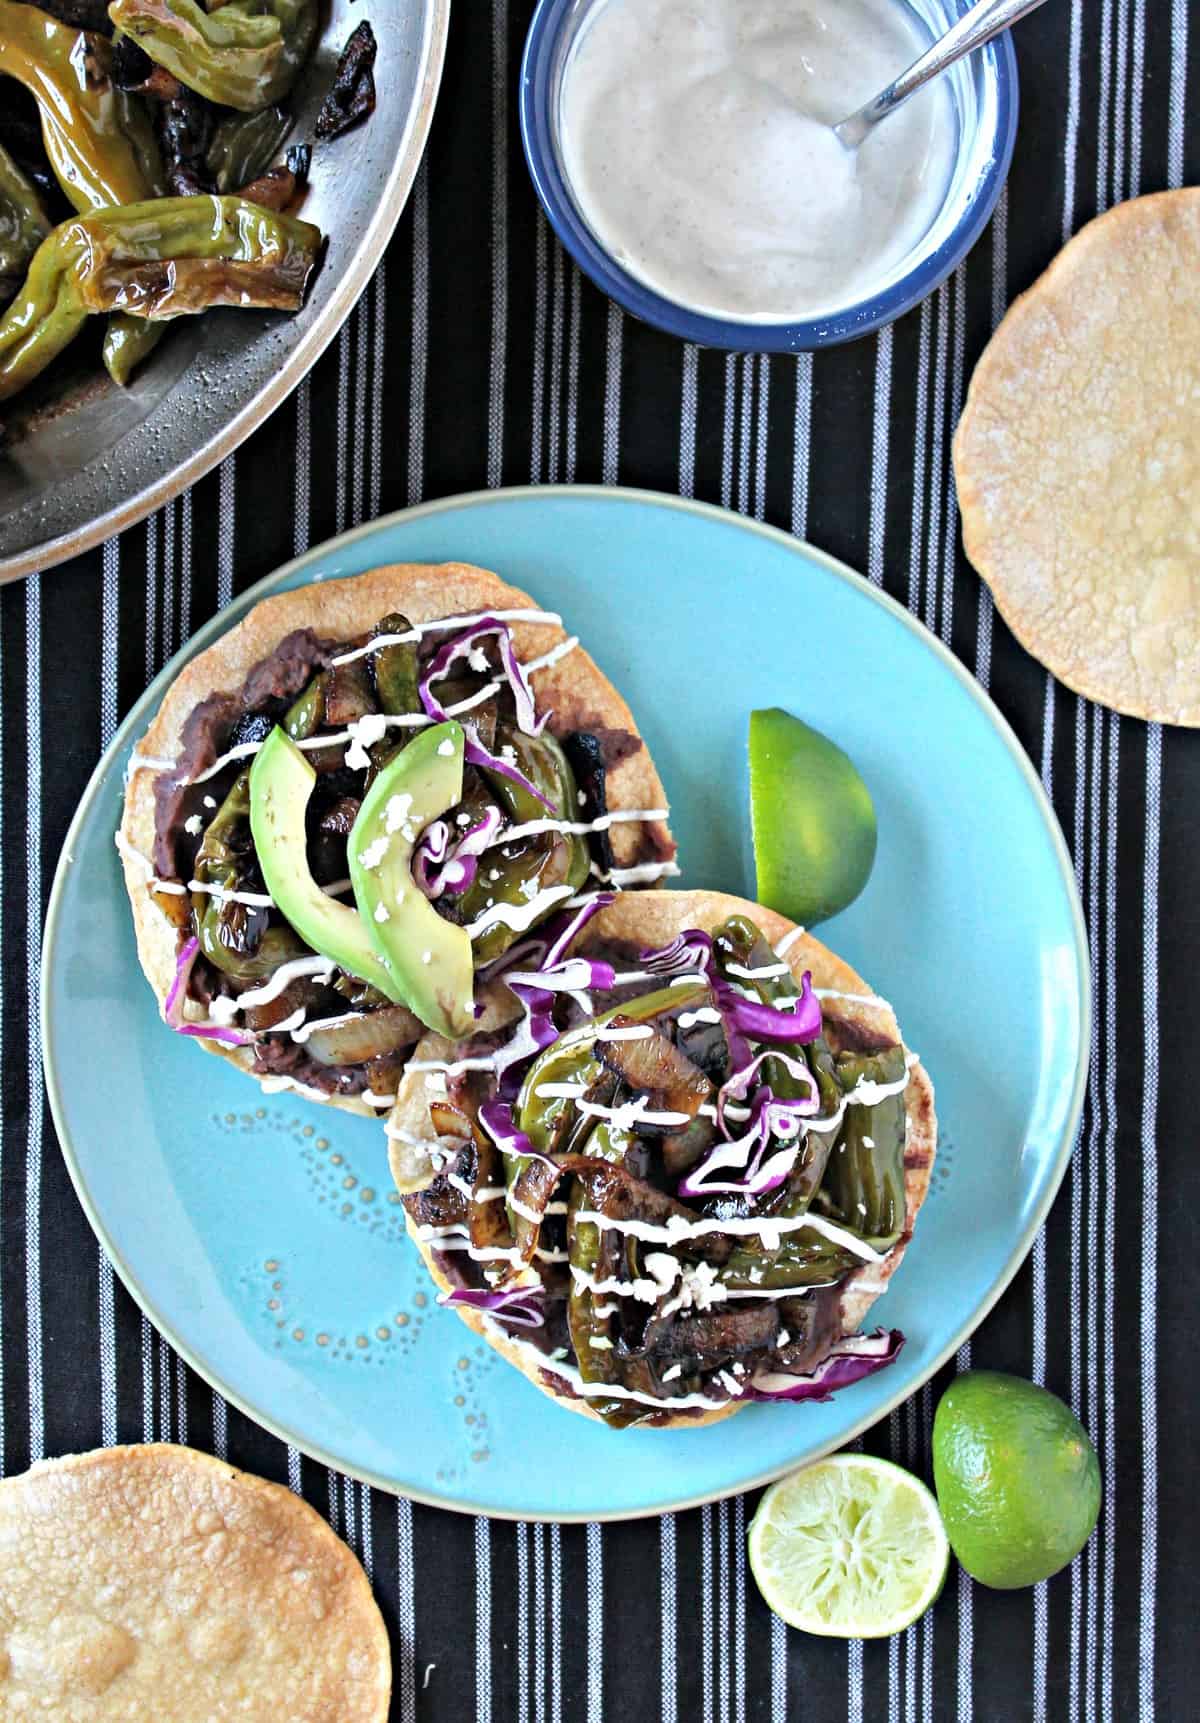 Charred Shishito Pepper & Refried Bean Tostadas! Just because these crunchy tostadas come together quickly doesn't mean they lack any flavor! Charred Shishito peppers, onions and refried beans drizzled with a Cumin & Lime Yogurt Sauce make a quick but delicious meal.